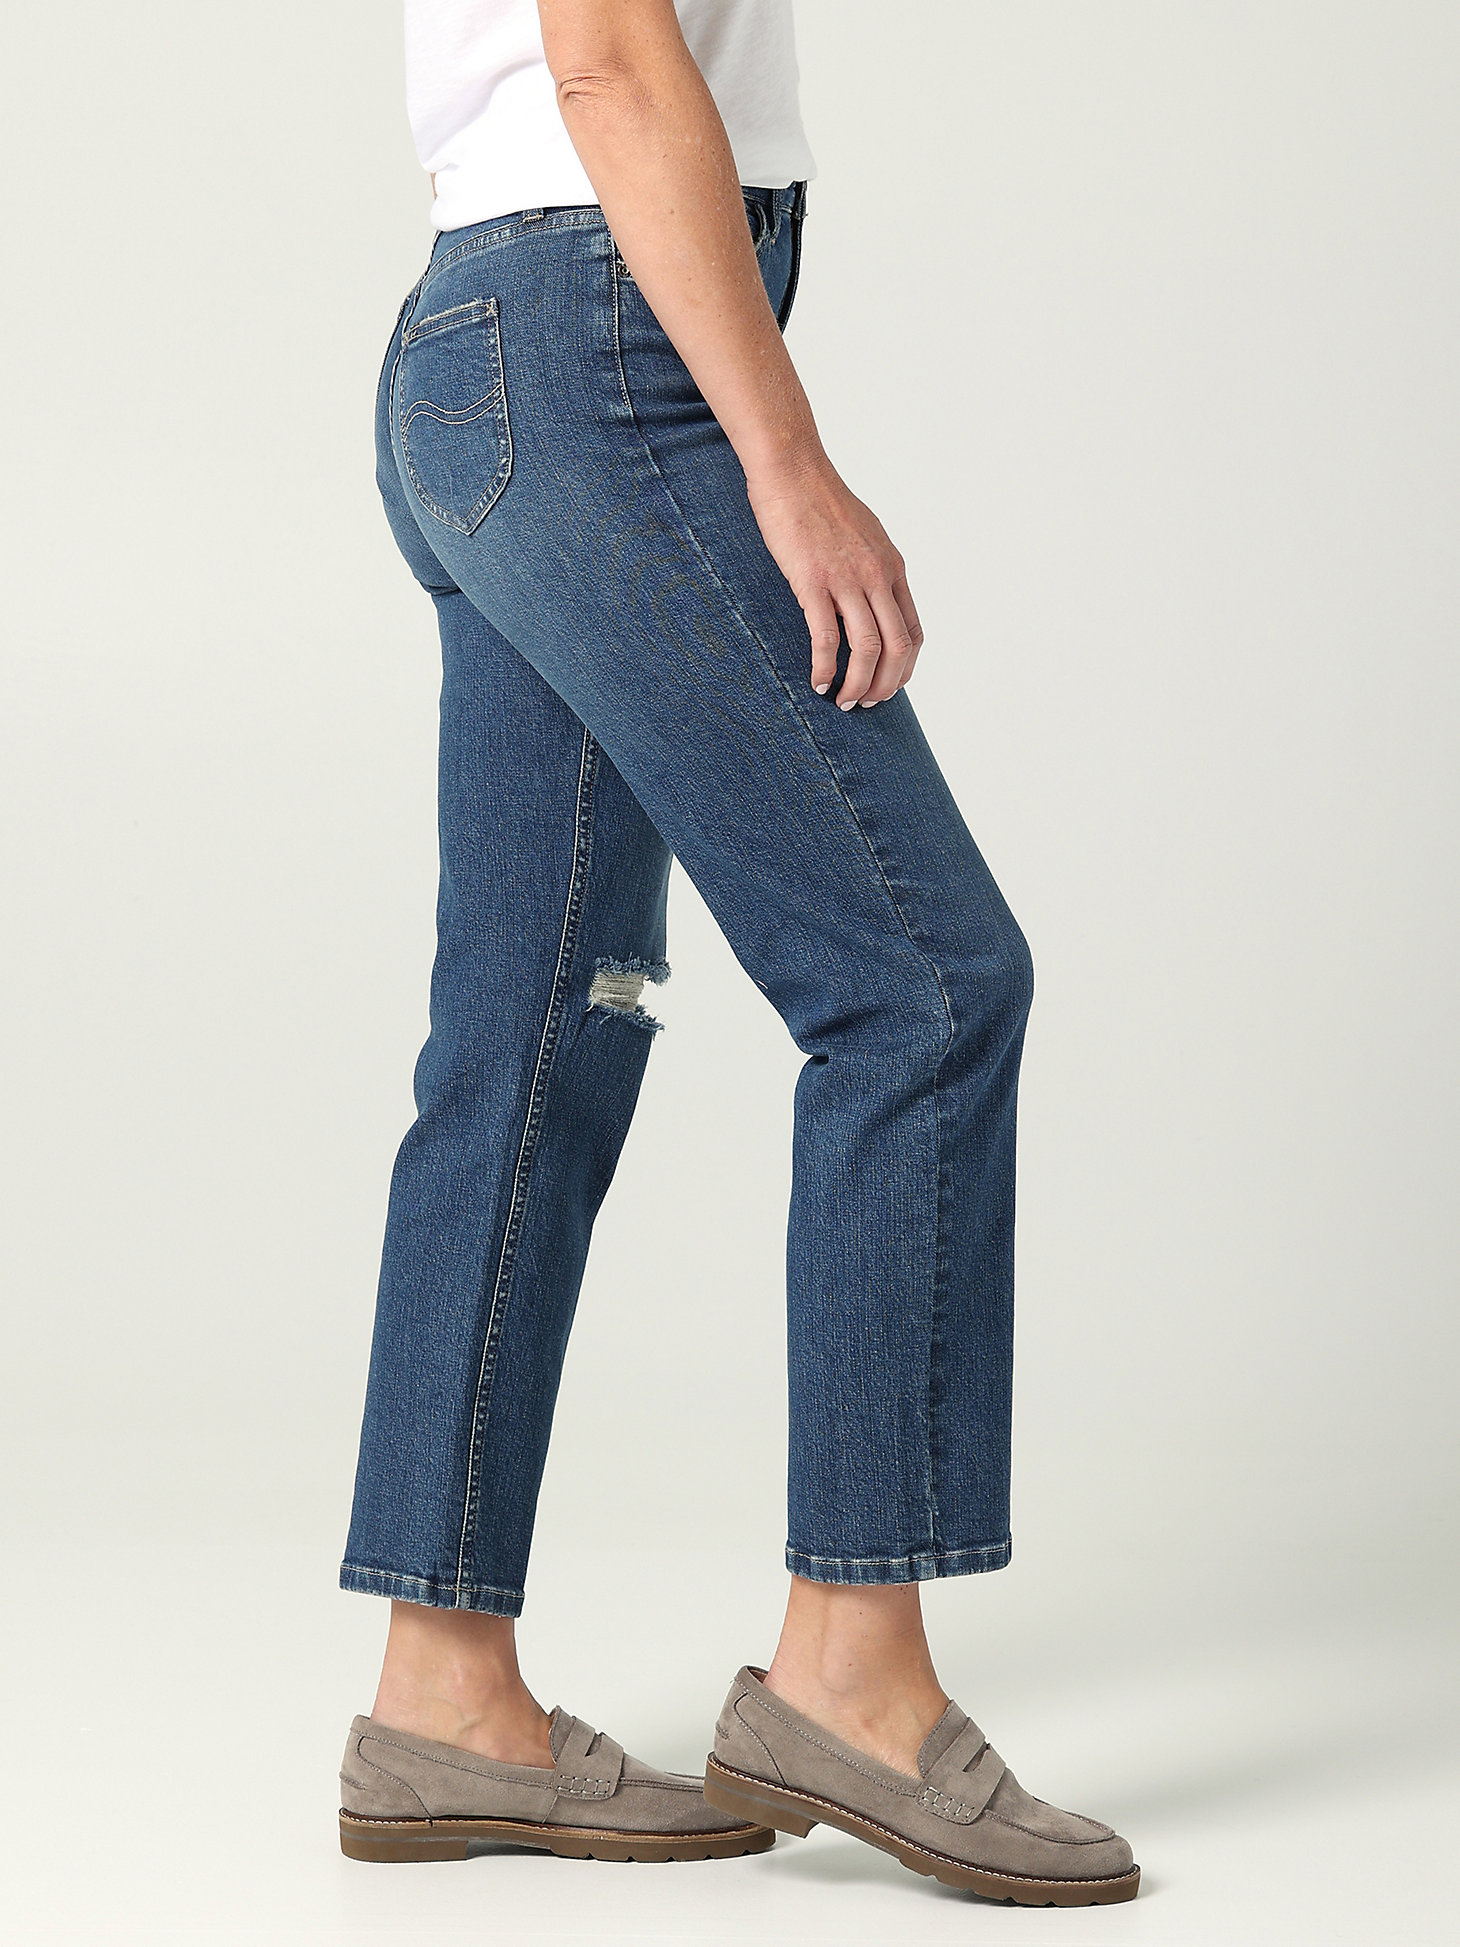 Women's Legendary High Rise Vintage Straight Jean in Everyday alternative view 2